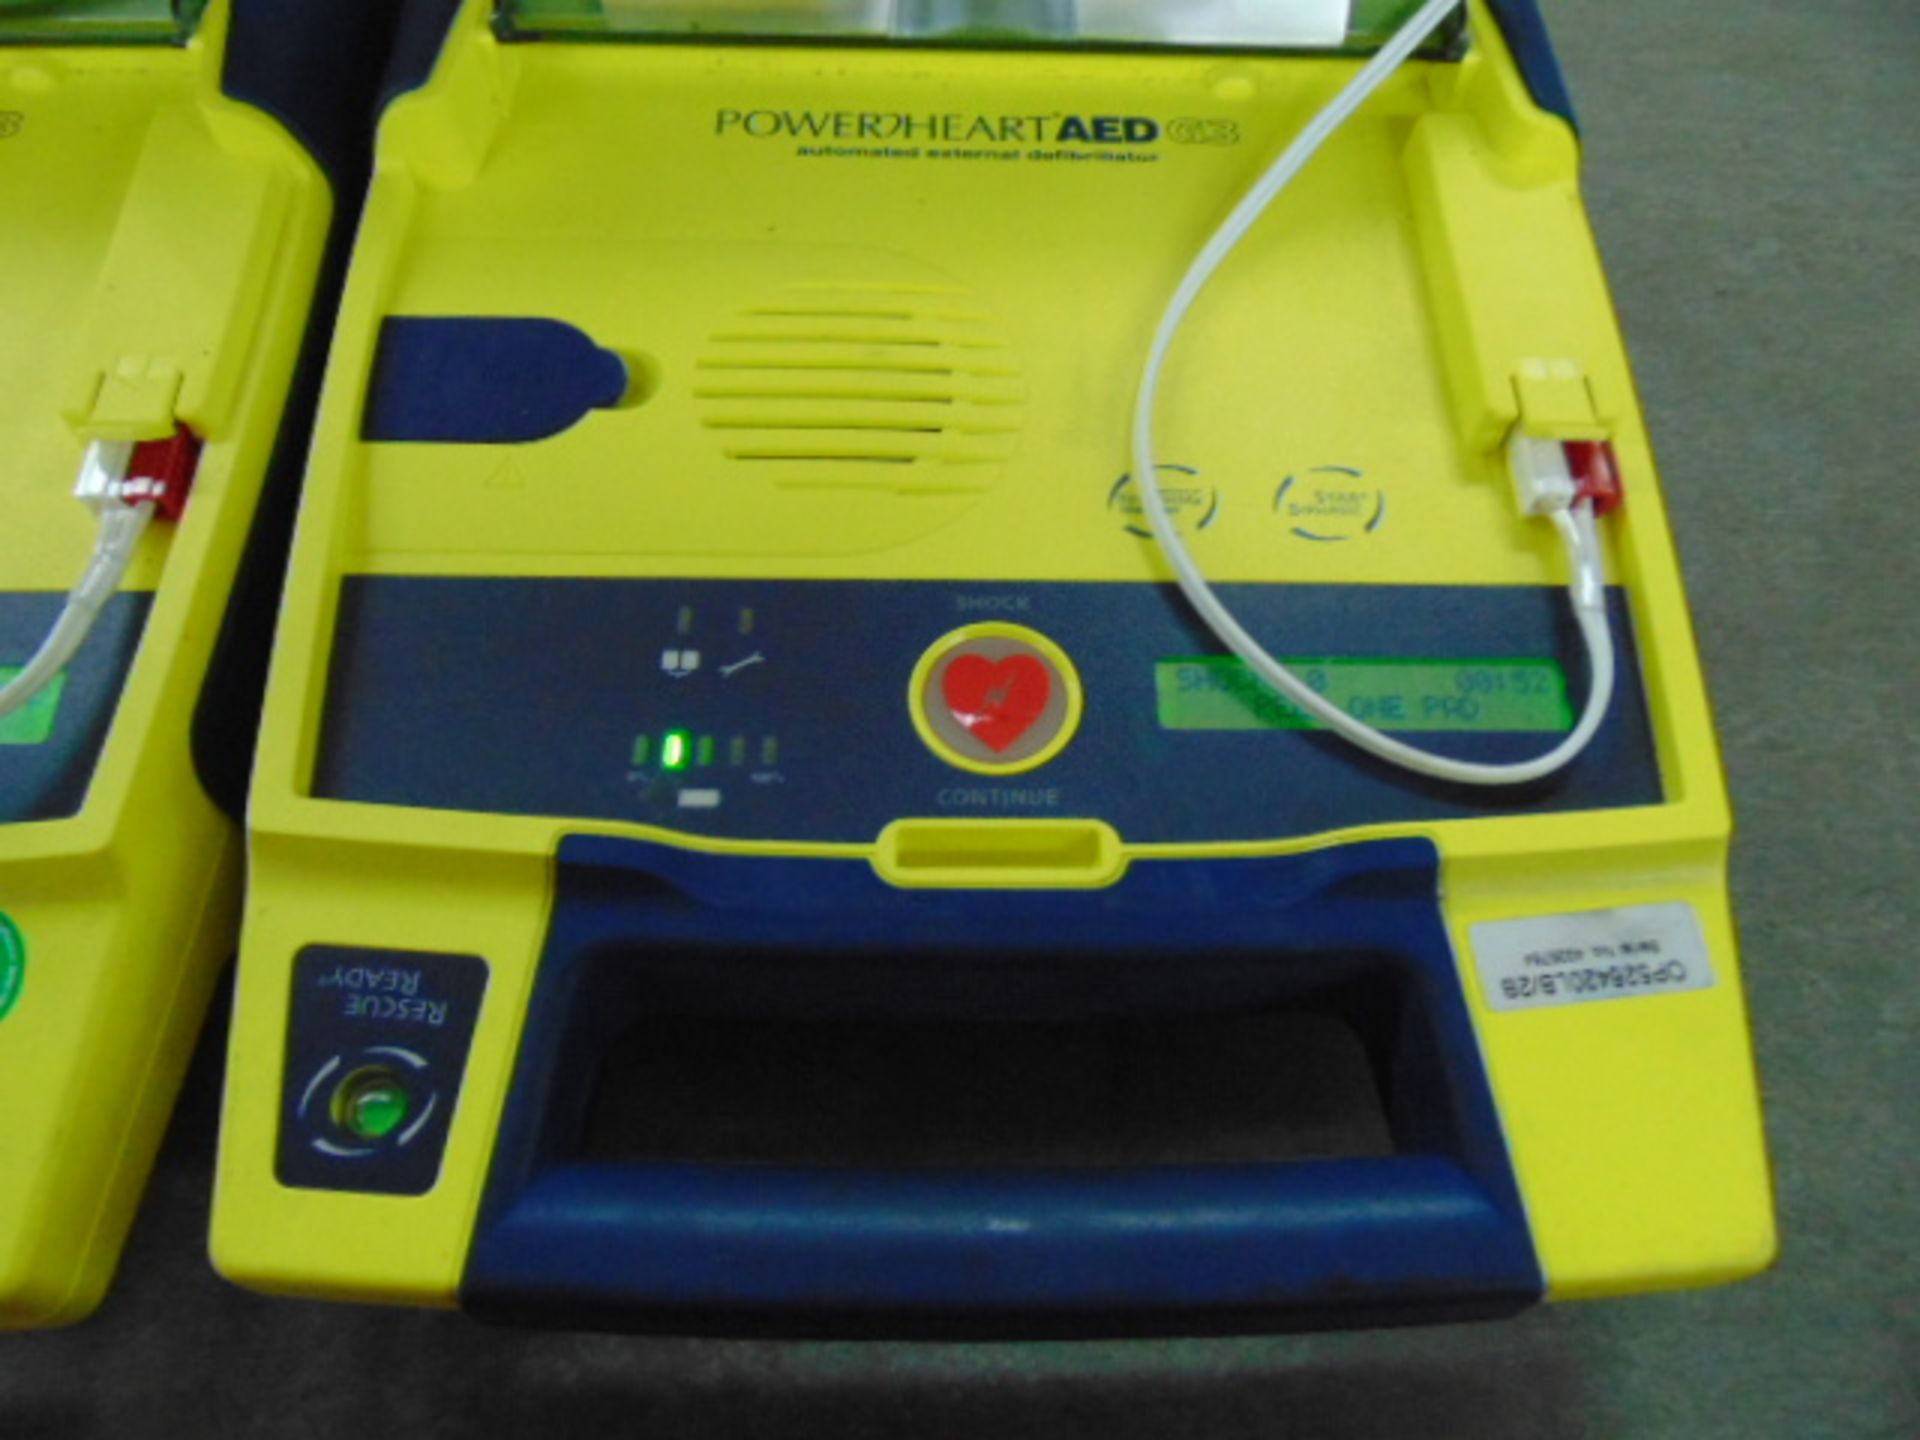 2 x Cardiac Science Powerheart G3 Automatic AED Automatic External Defribrillators - Image 6 of 12